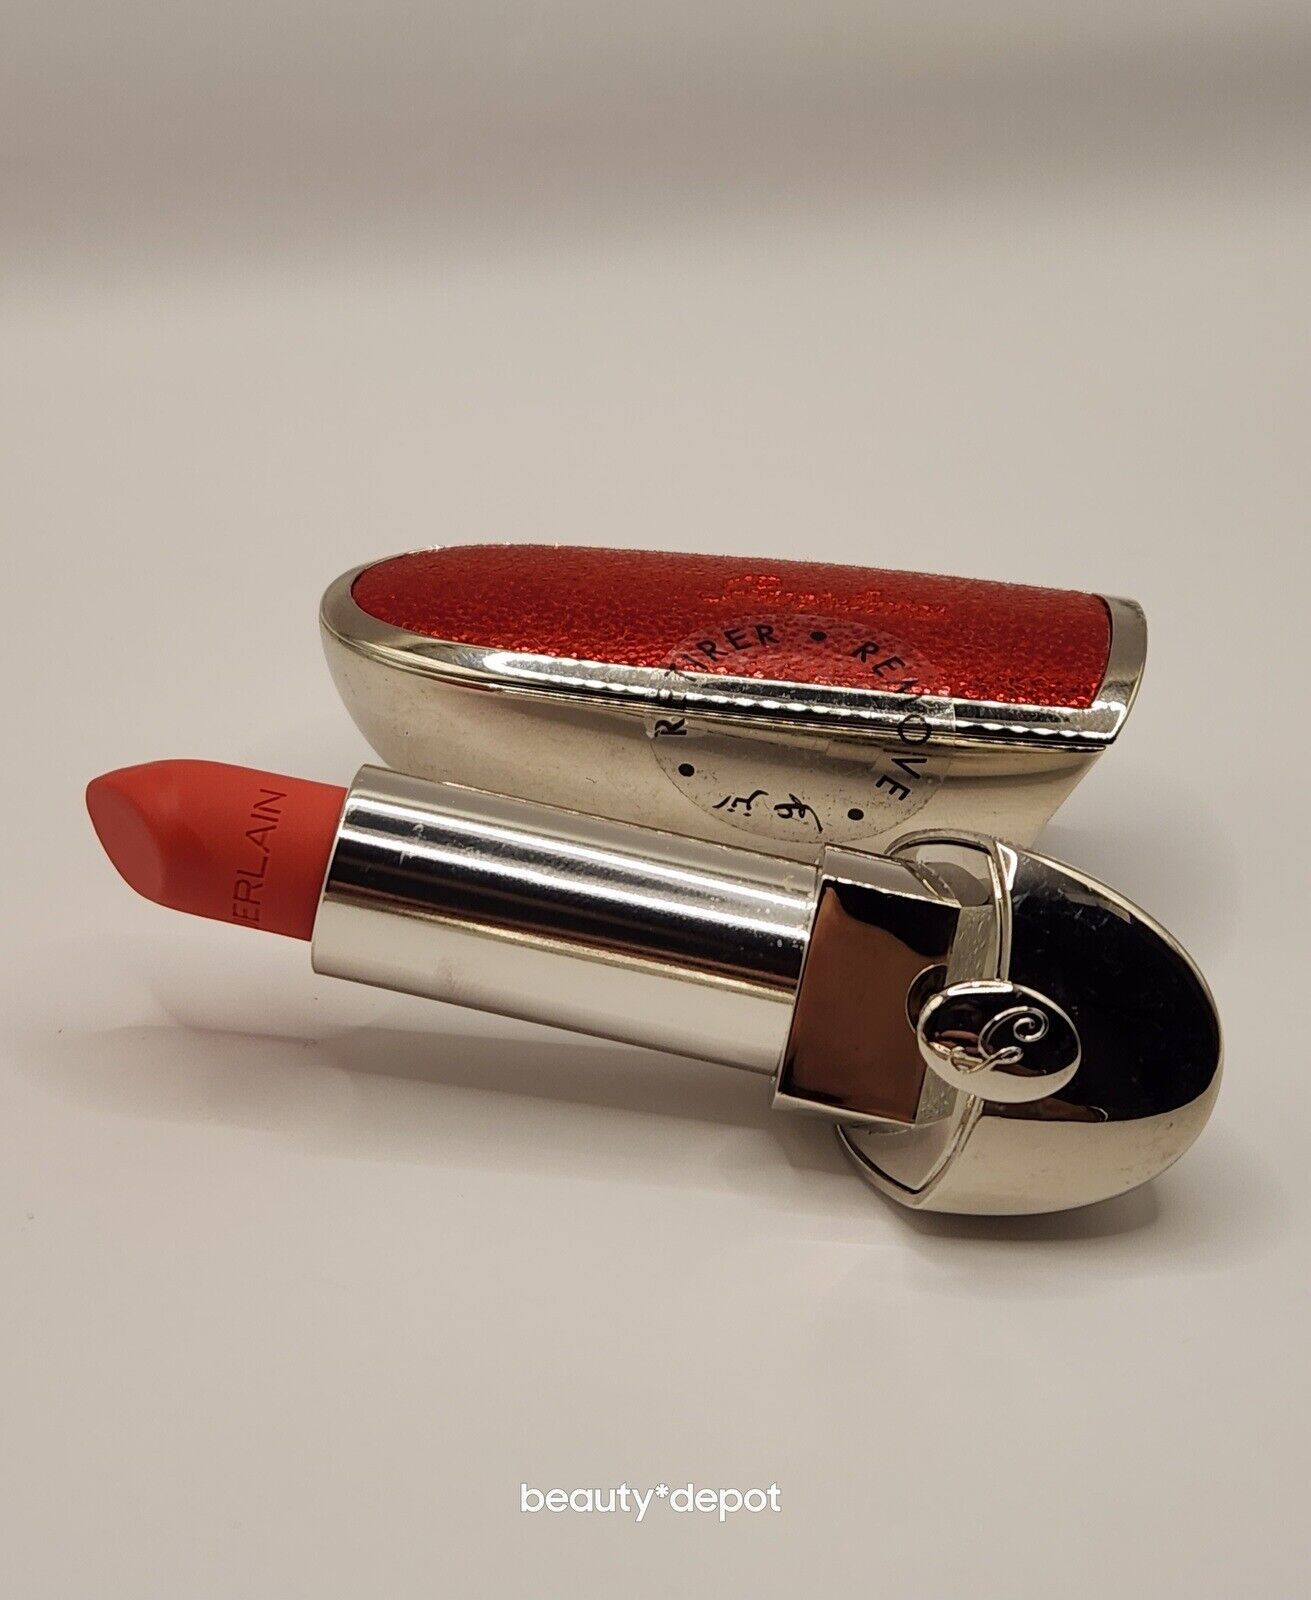 Primary image for Guerlain Rouge G Refillable Lipstick | No. 61 Matte